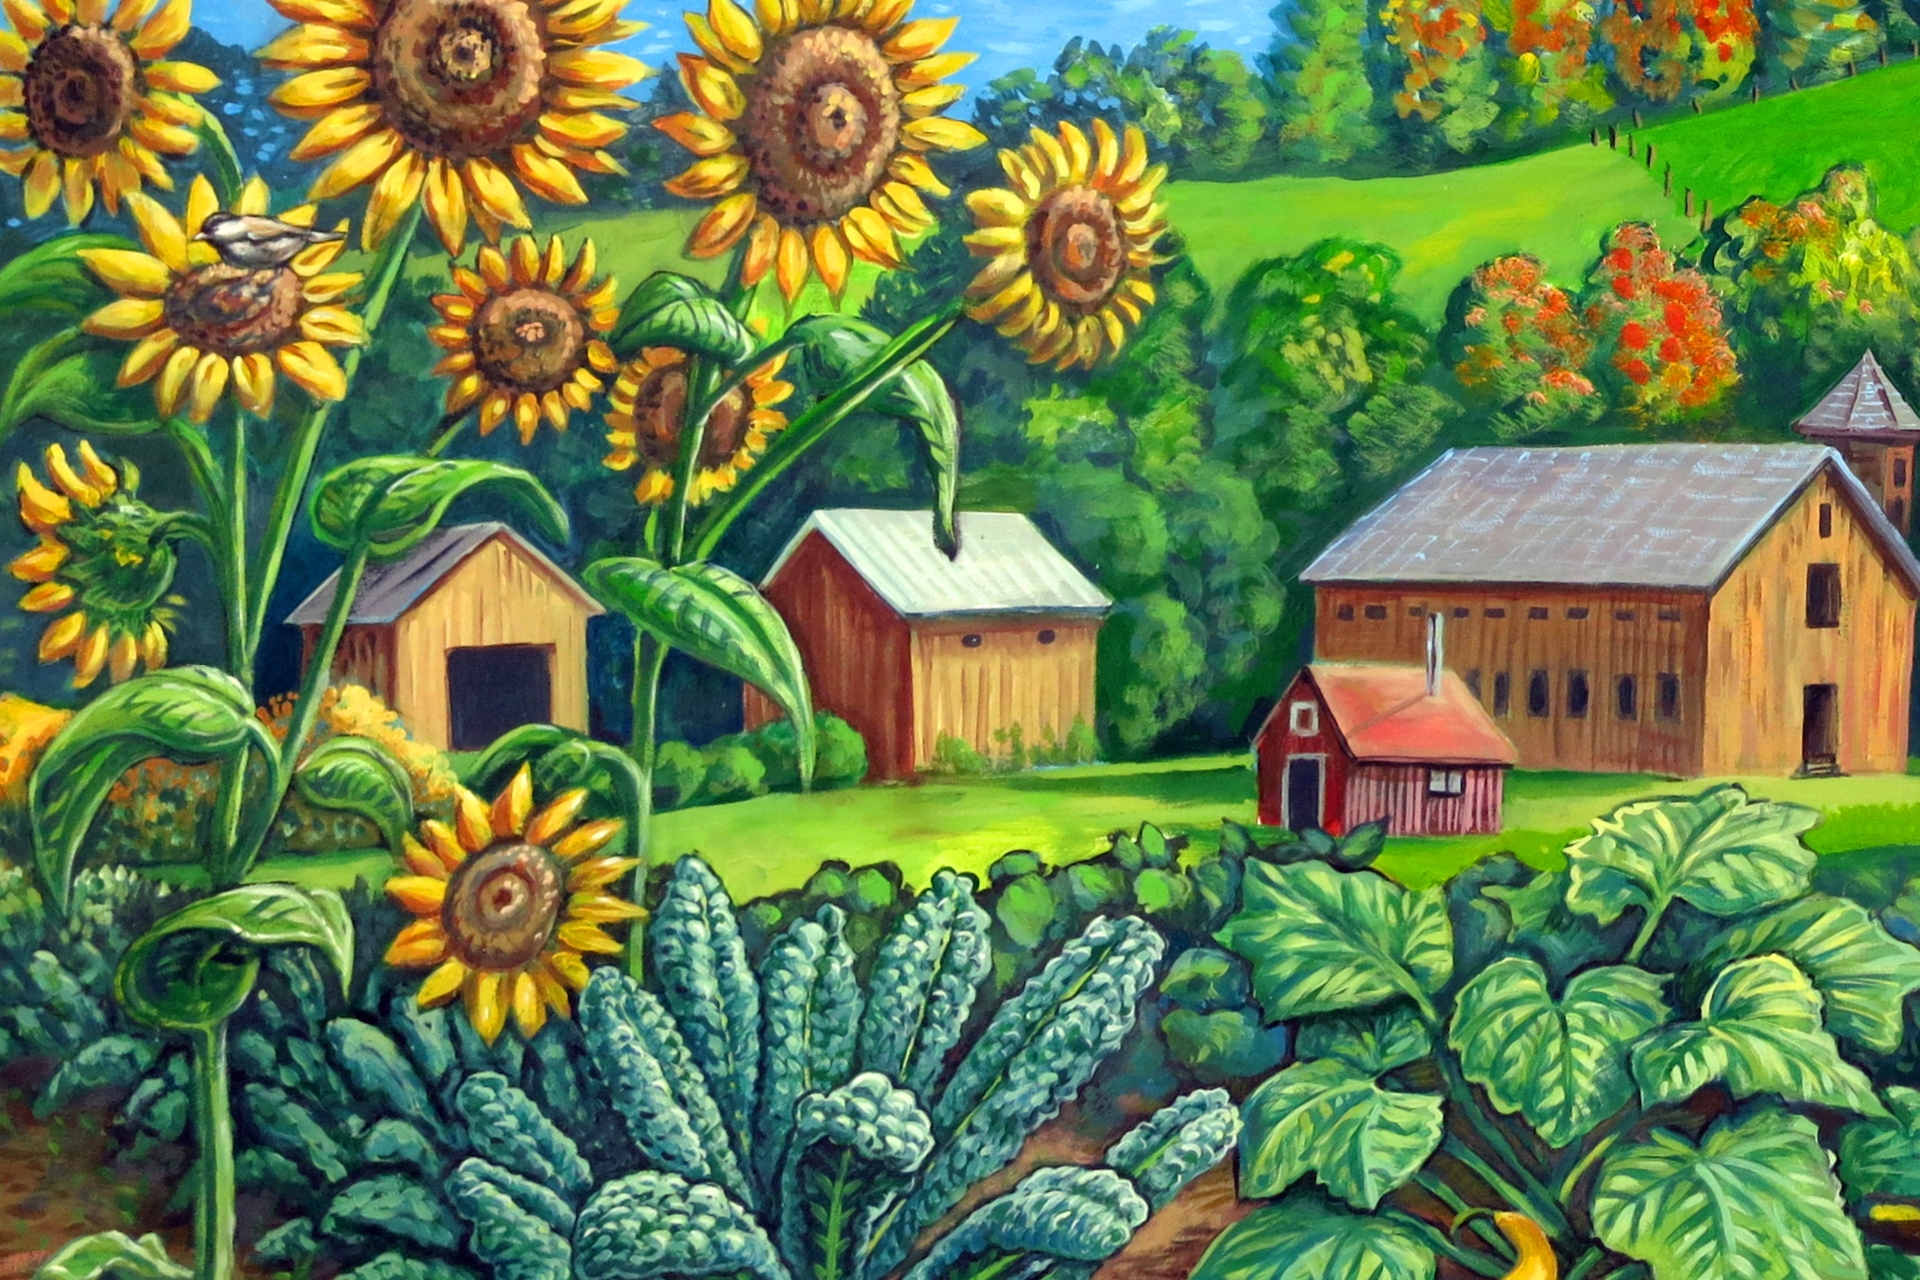 A mural painting depicting a colorful farm field with sunflowers, kale and squash in the foreground and several farm buildings in the background 